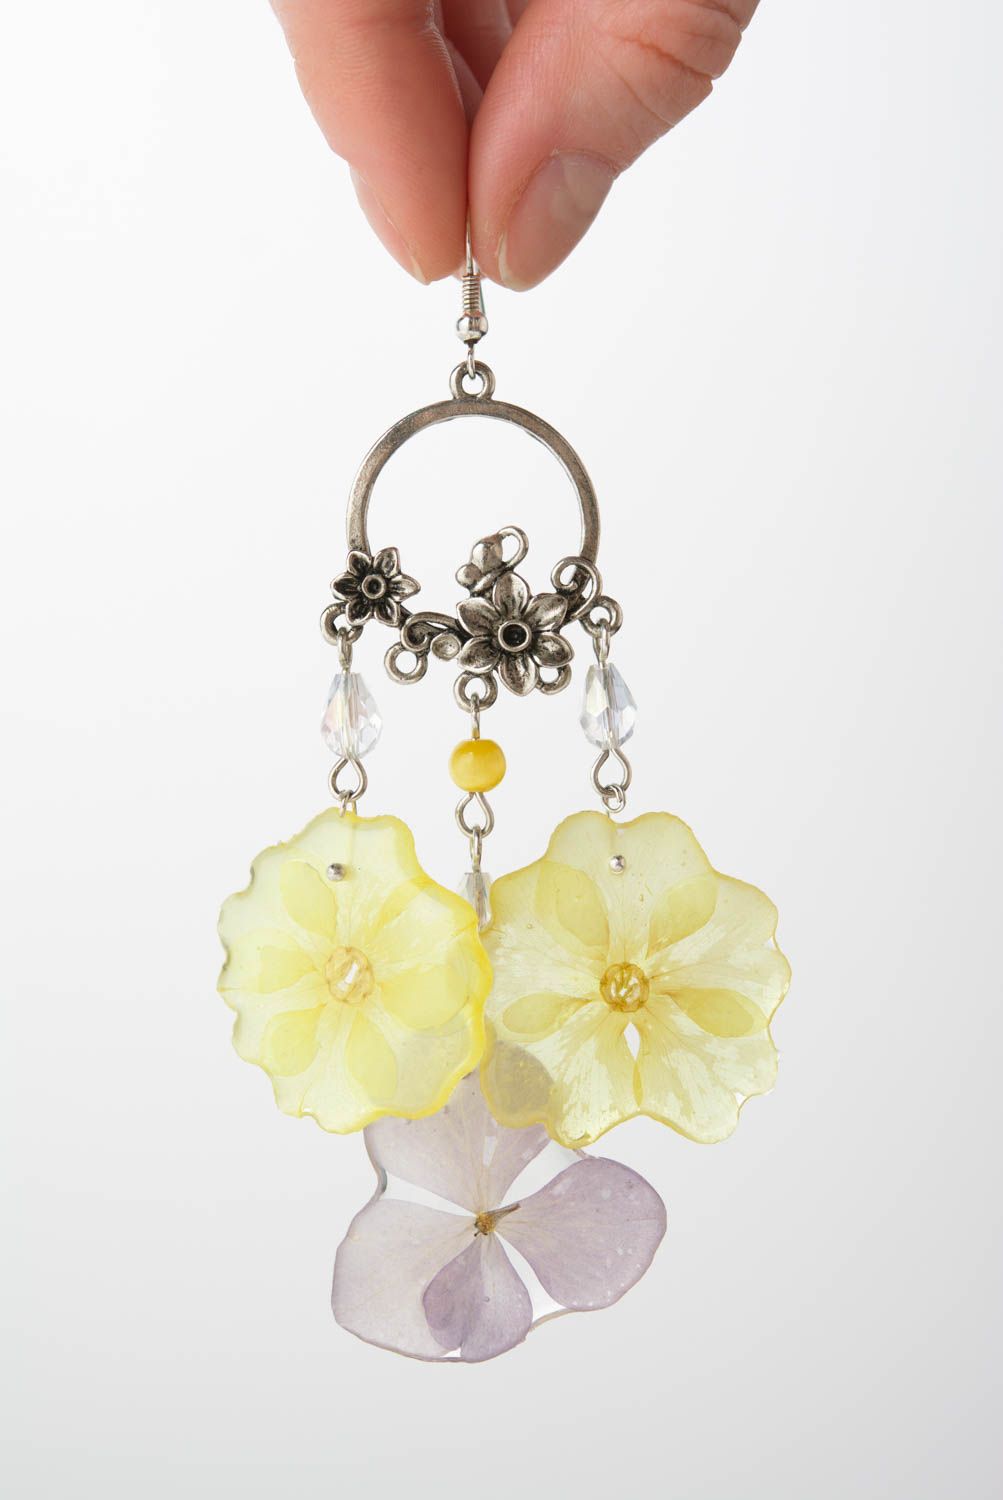 Handmade decorative earrings with primrose and hydrangea petals in epoxy resin photo 4